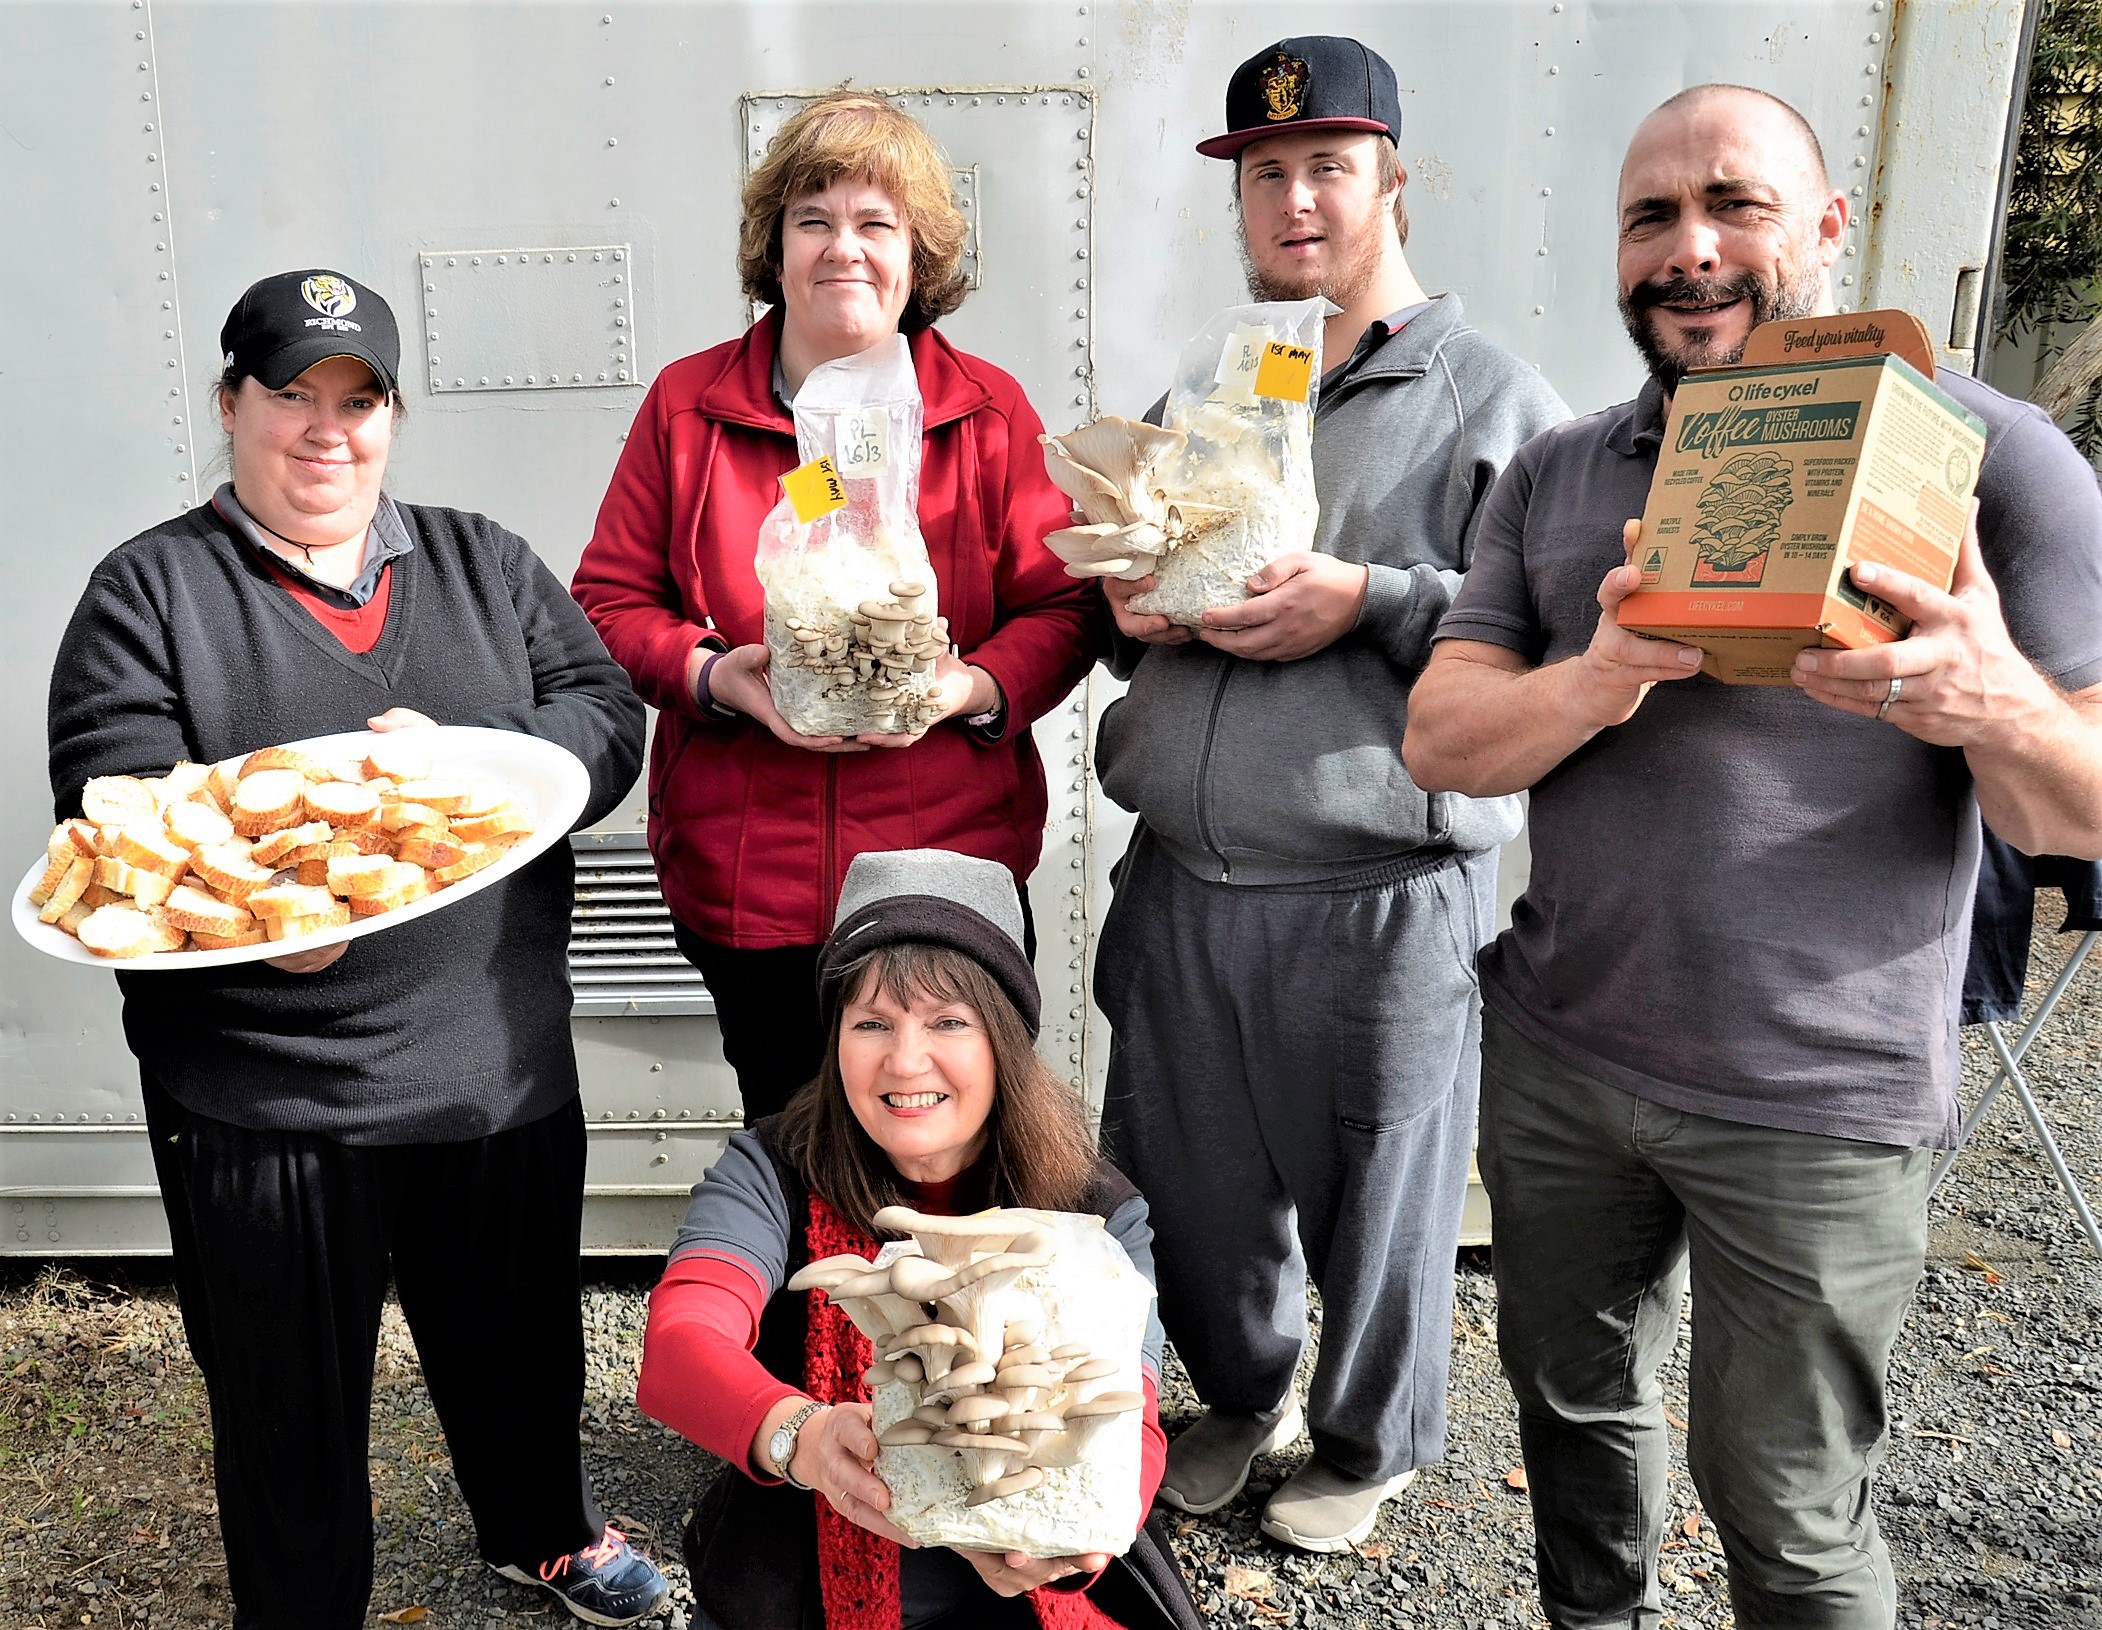 Windarring Urban Mushroom Farm workers Tegwen Prest, Melissa Gale and Josh Dixon with Windarring's employment pathways manager Mark Castle and team leader Mandy Fennessy.